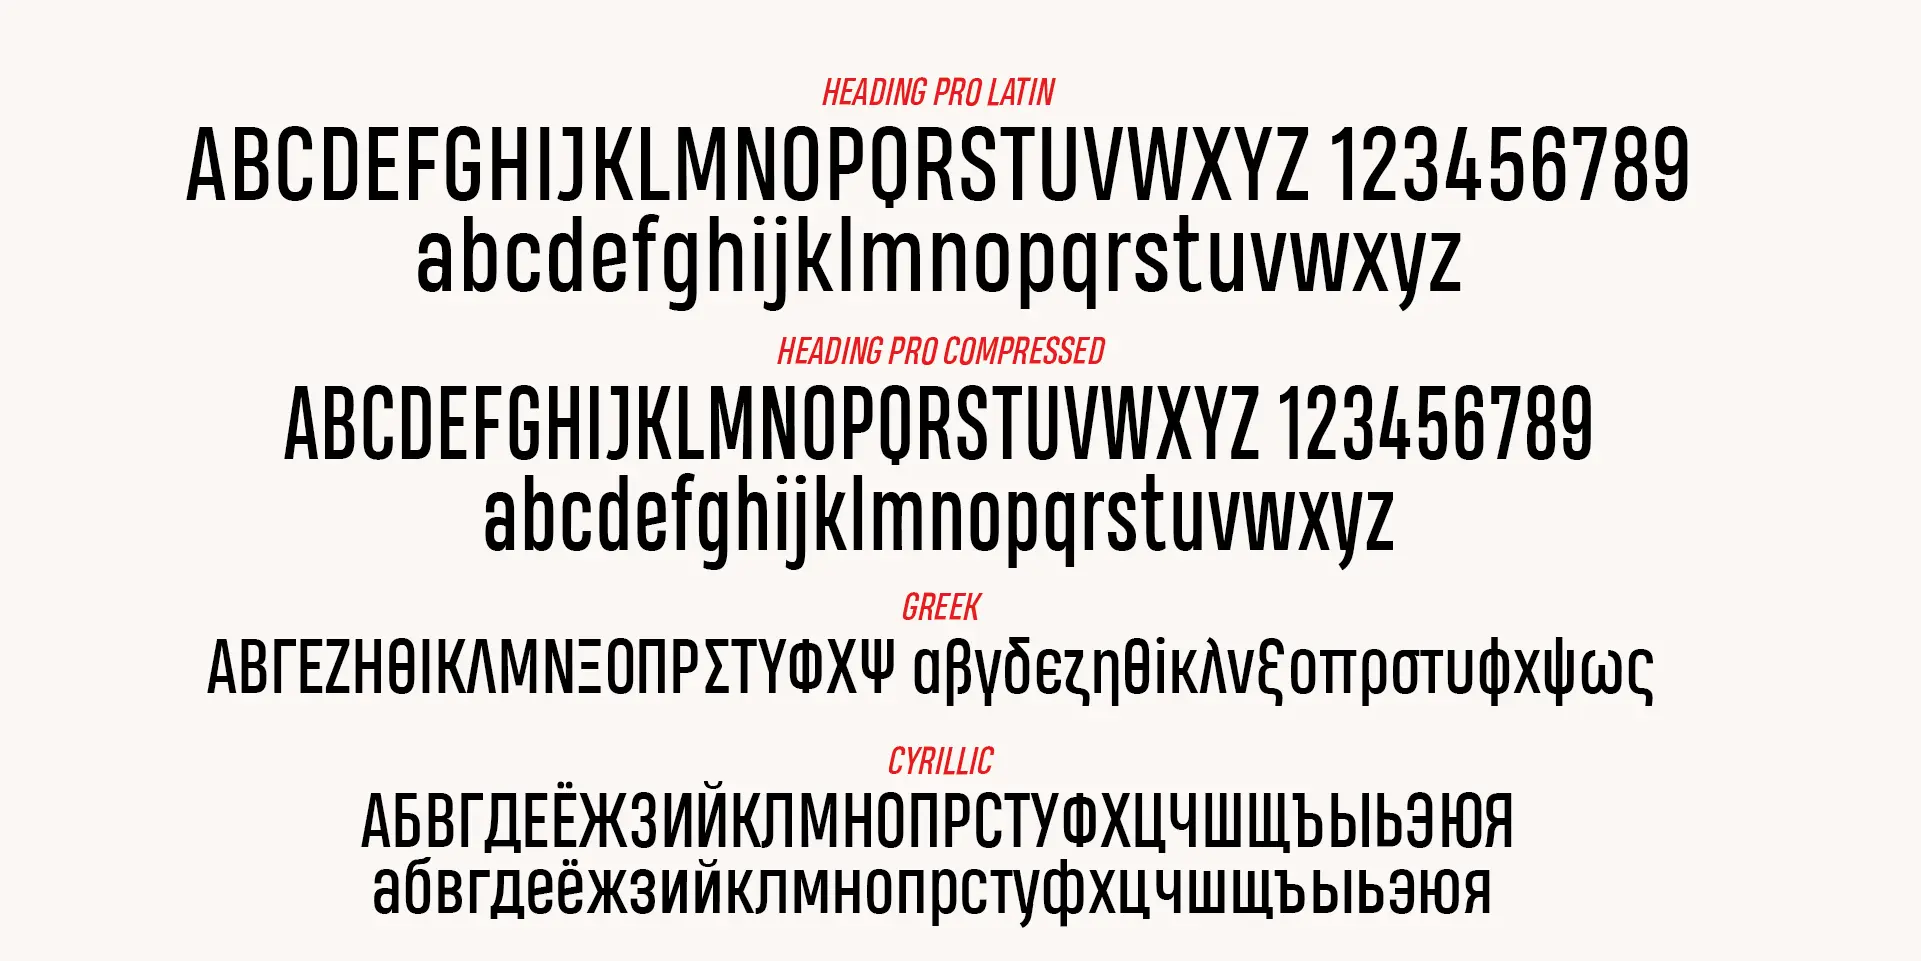 heading pro font free download